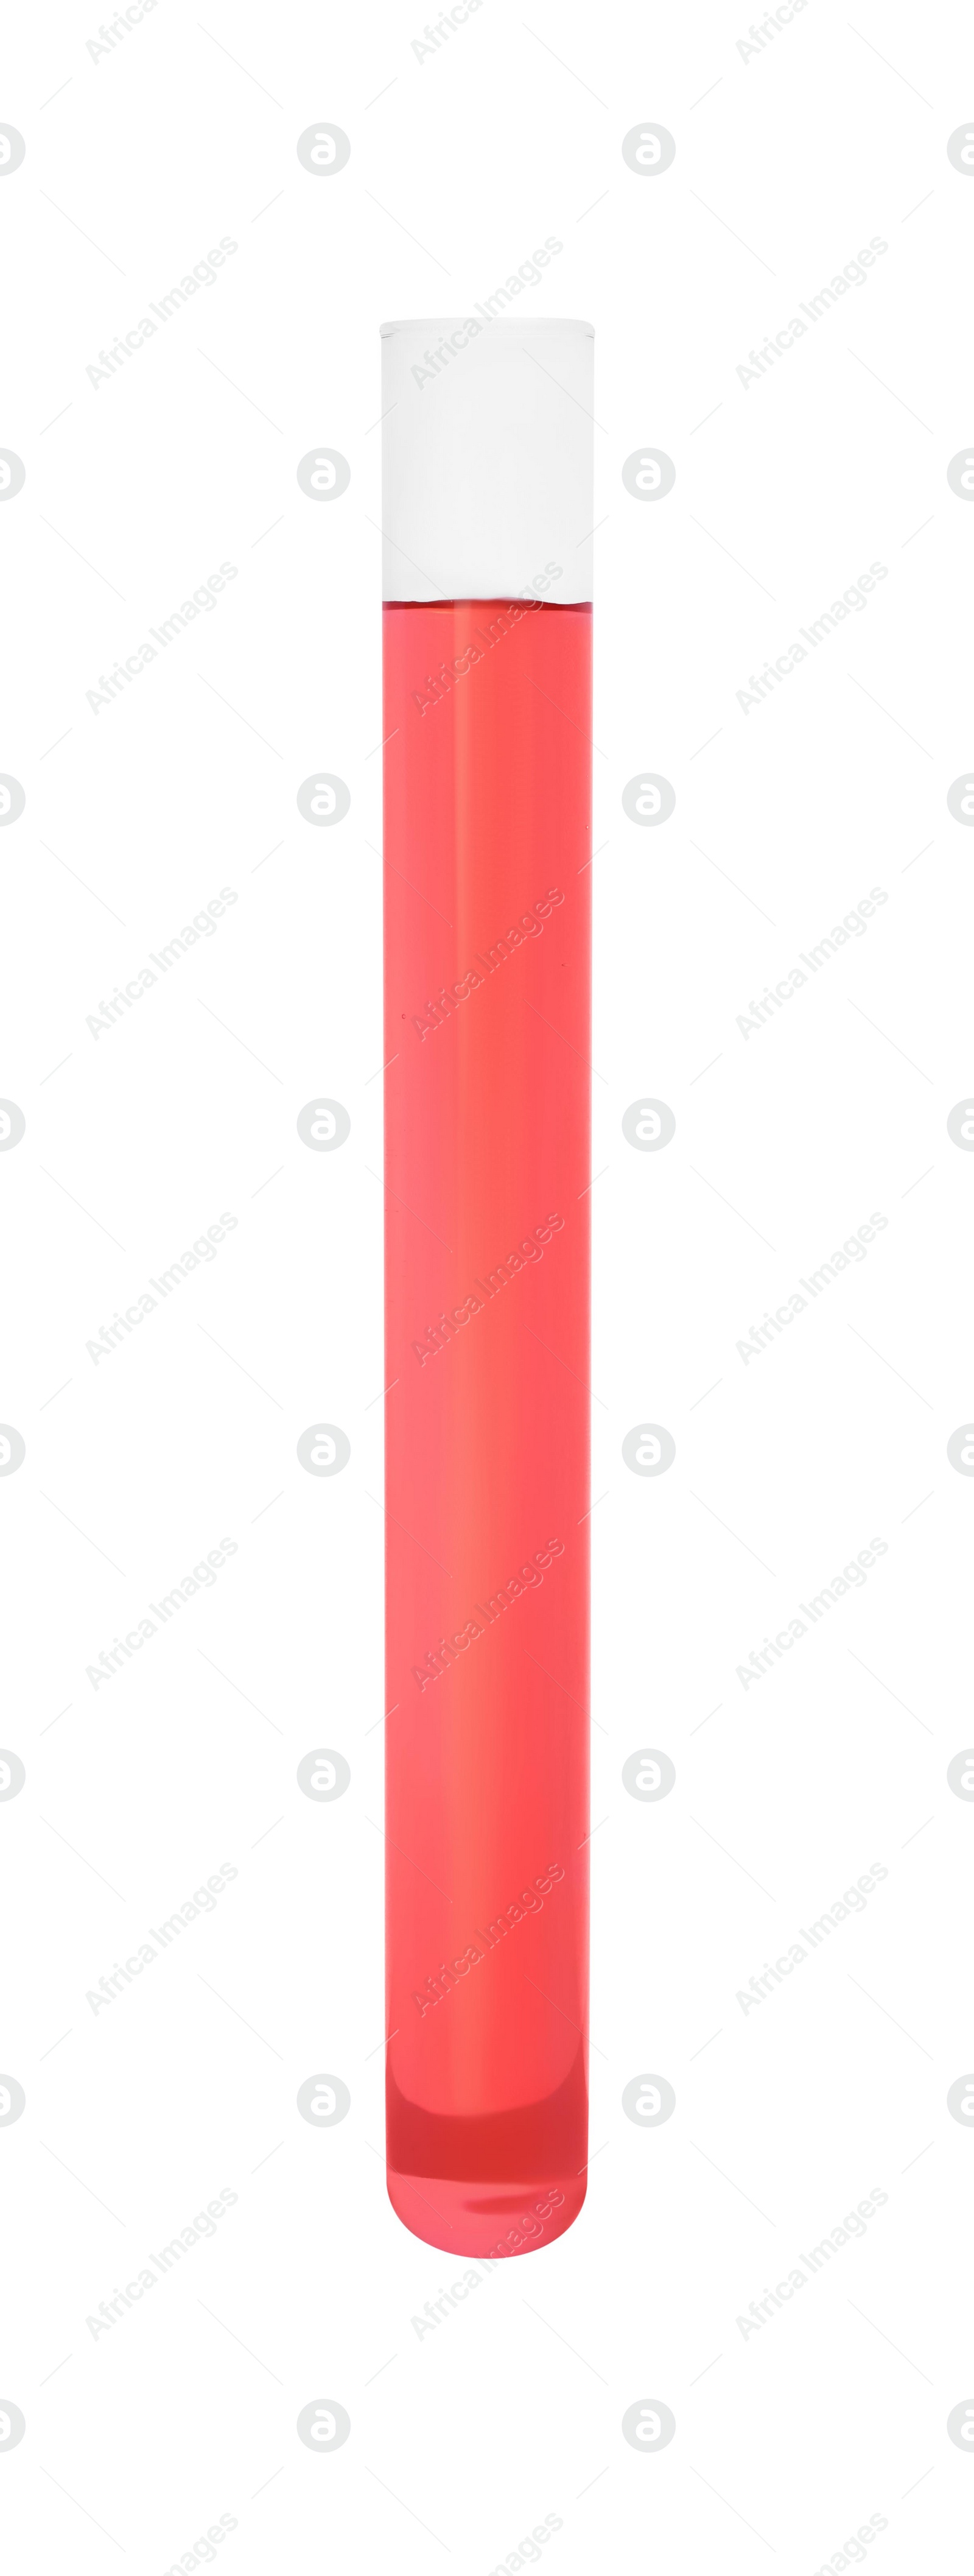 Photo of Test tube with red liquid isolated on white